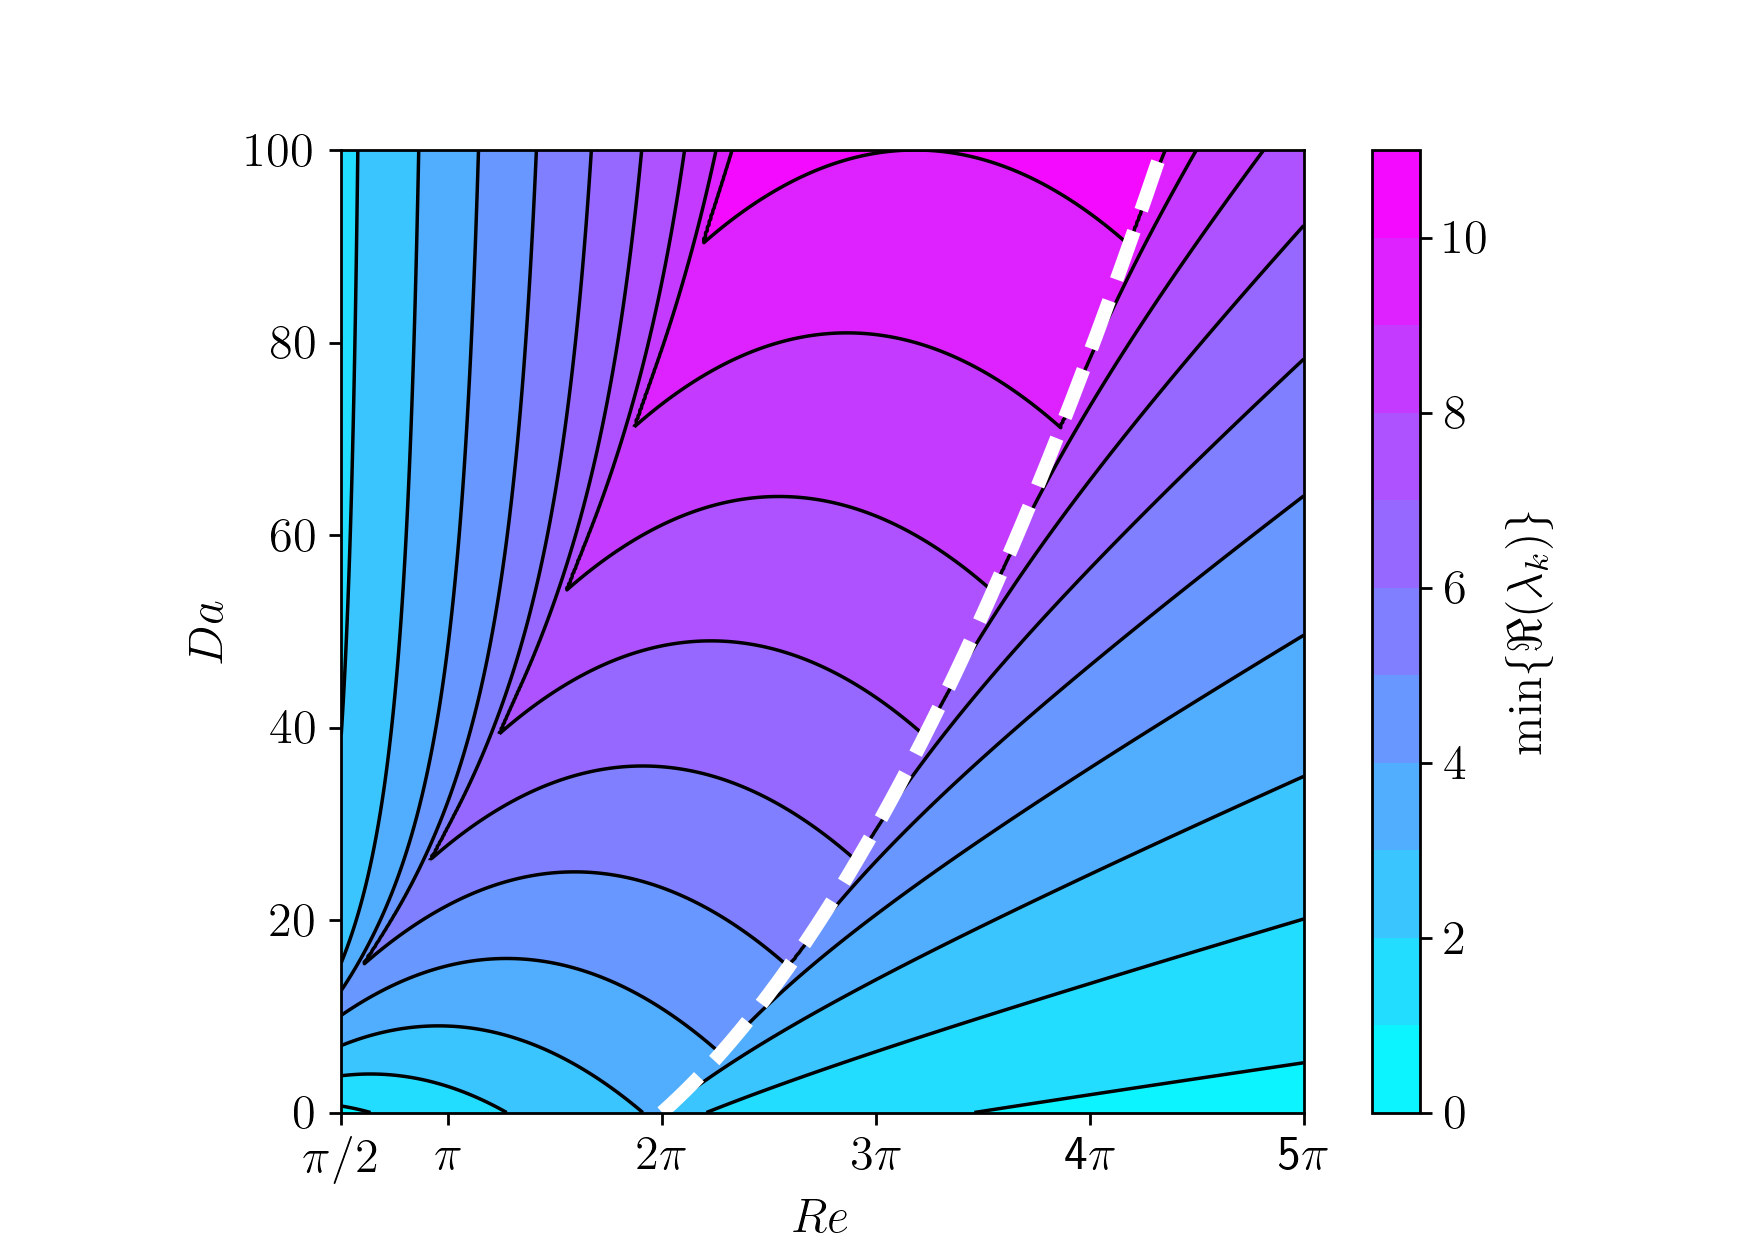 fig_dispersion_analysis_transient_diffusion1D.png